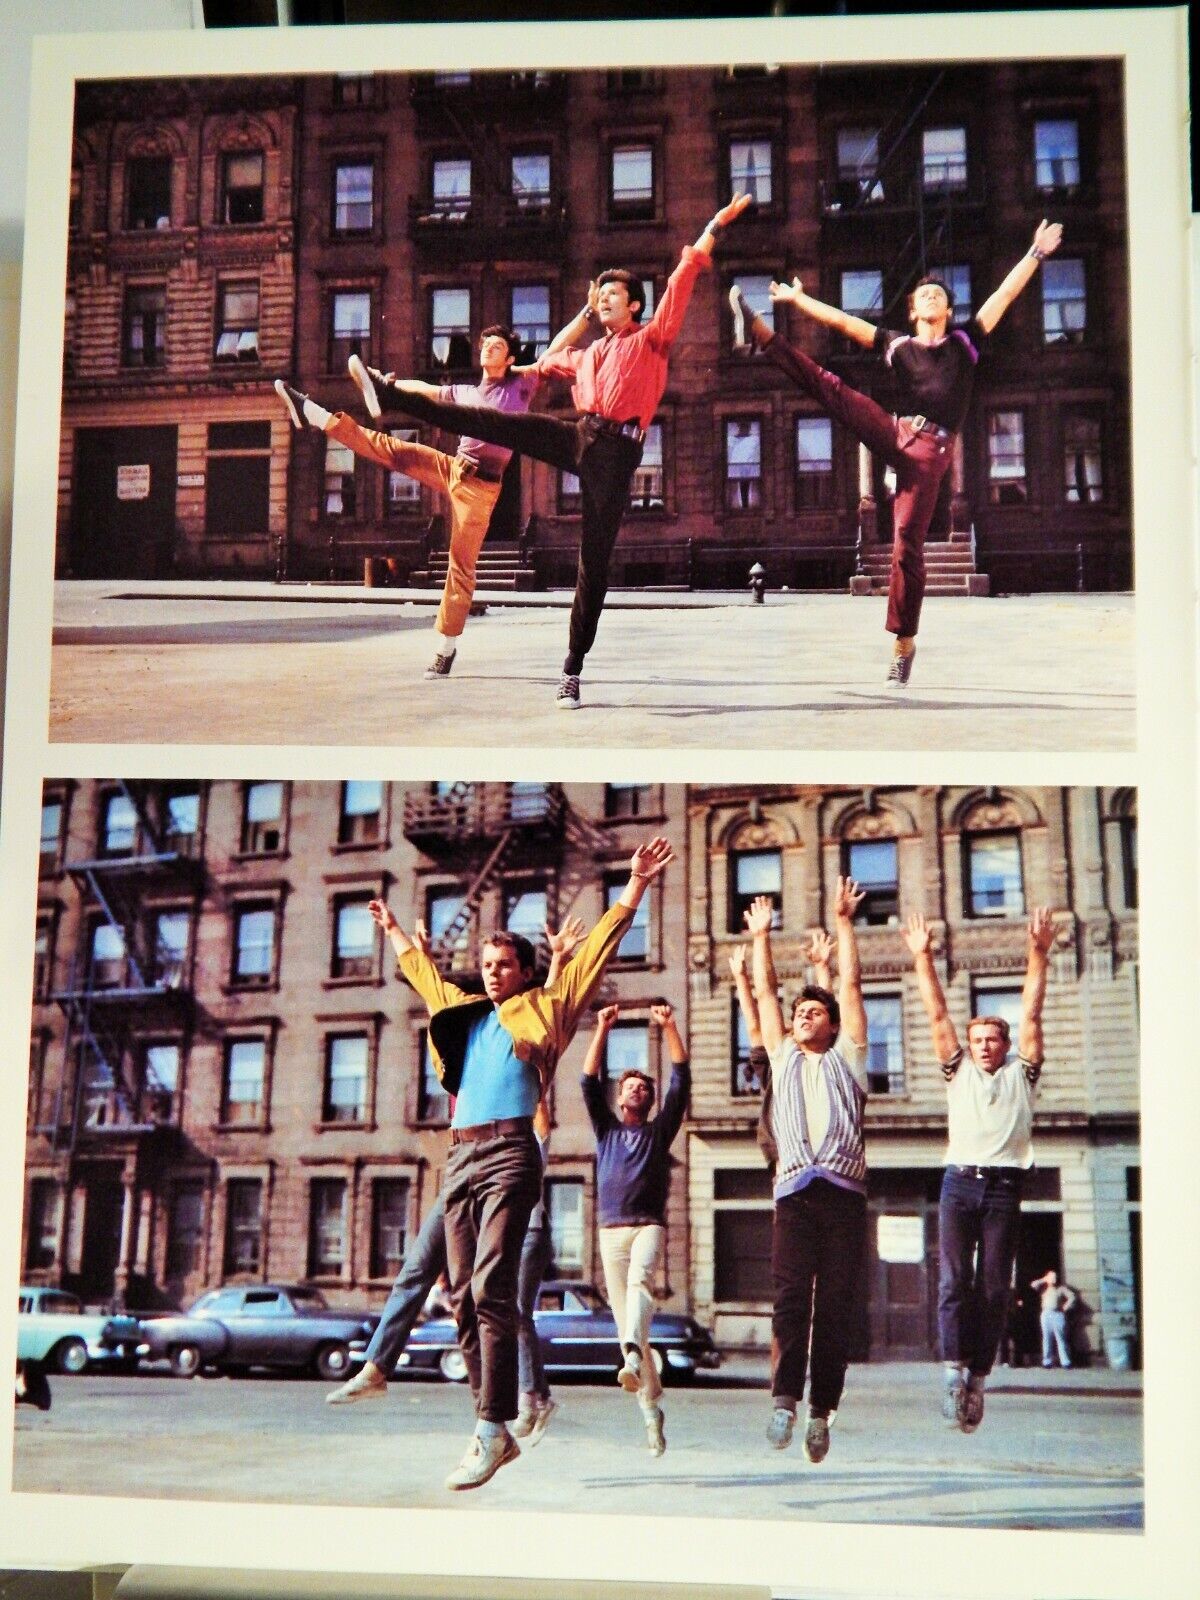 WEST SIDE STORY (CHAKIRIS, RUSS TAMBLYN, 1961) MOVIE Photo Poster painting (1985 reprint)